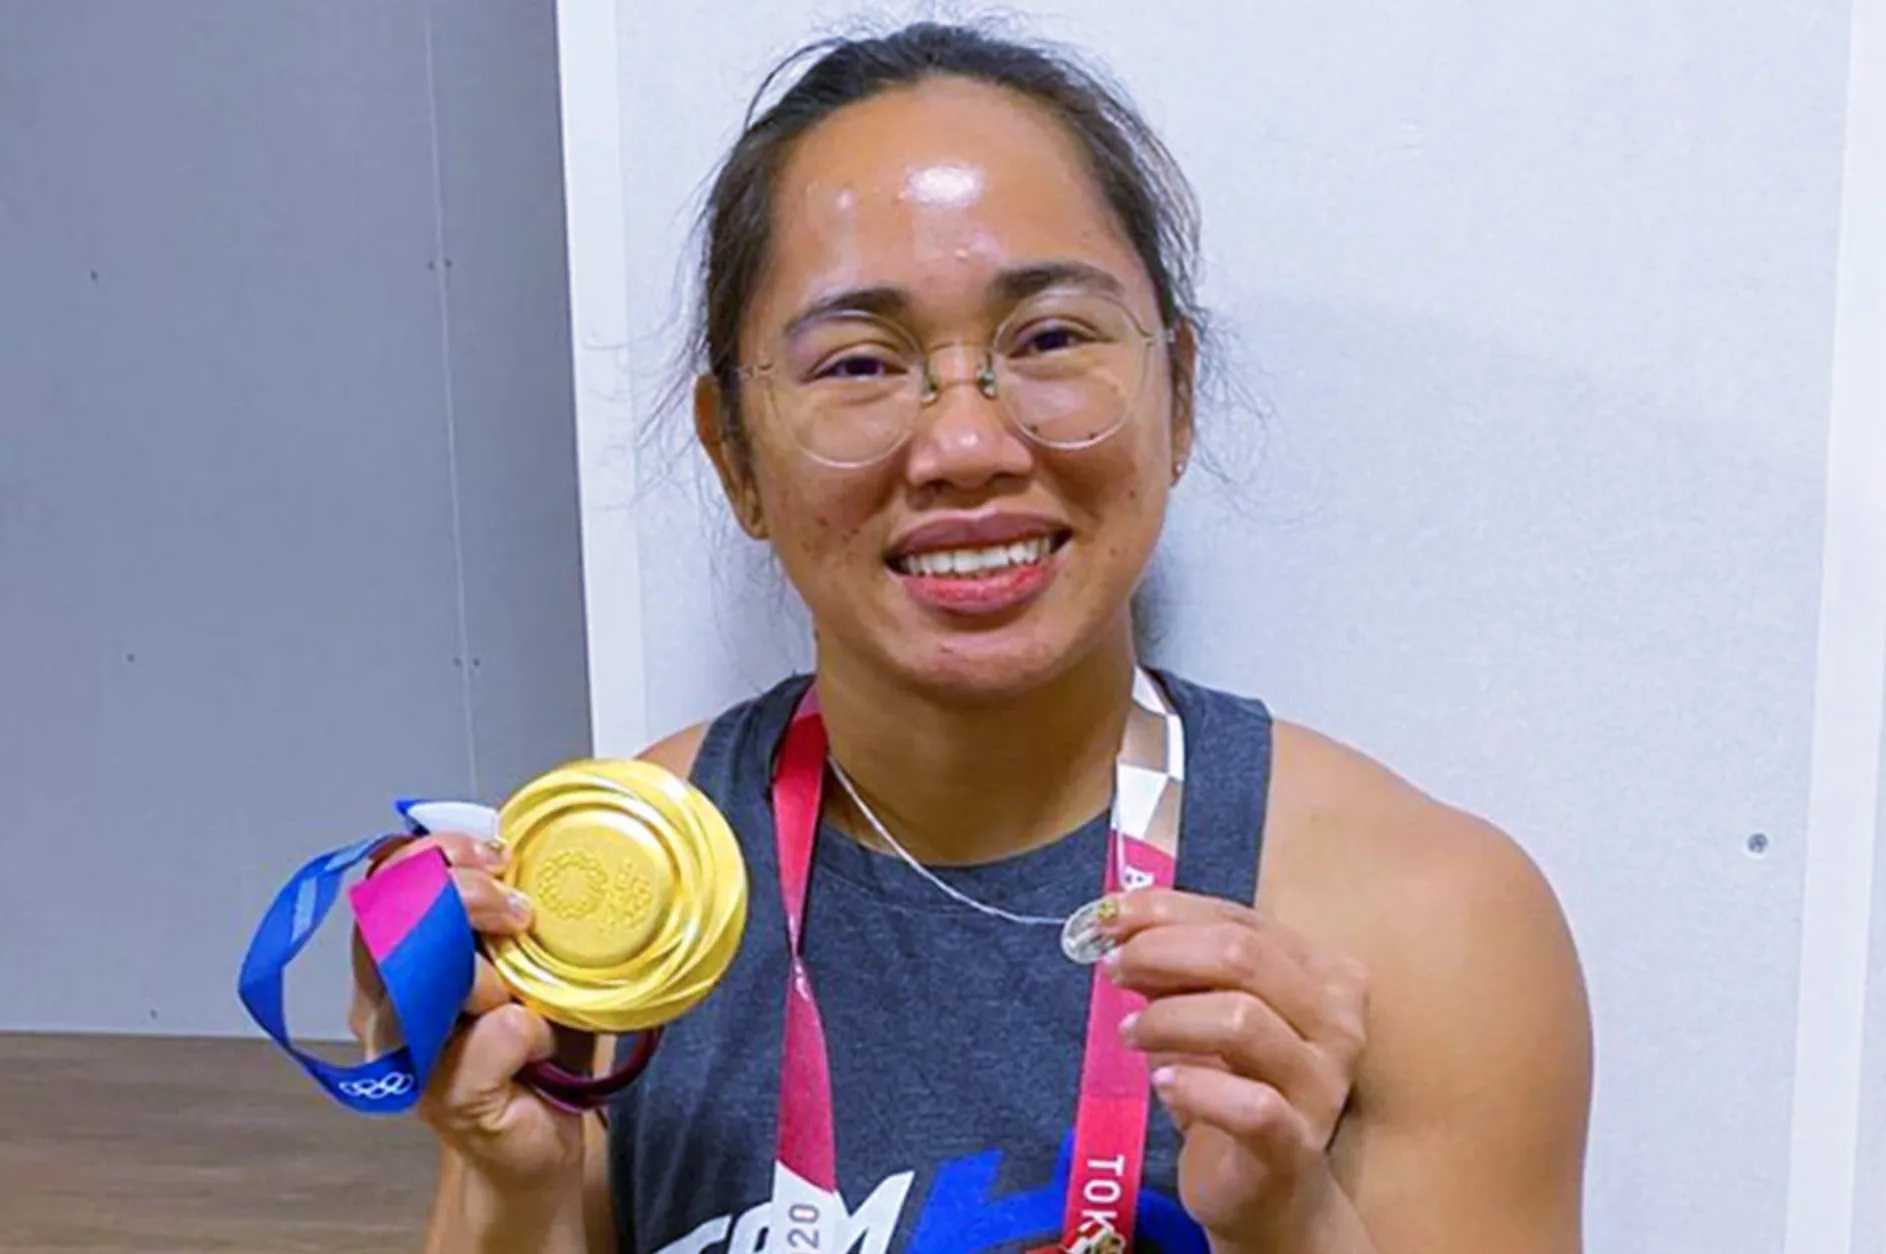 Filipina weightlifter Hidilyn Diaz proudly displays her Olympics gold medal and the Miraculous Medal, a devotional medallion depicting the Virgin Mary.?w=200&h=150